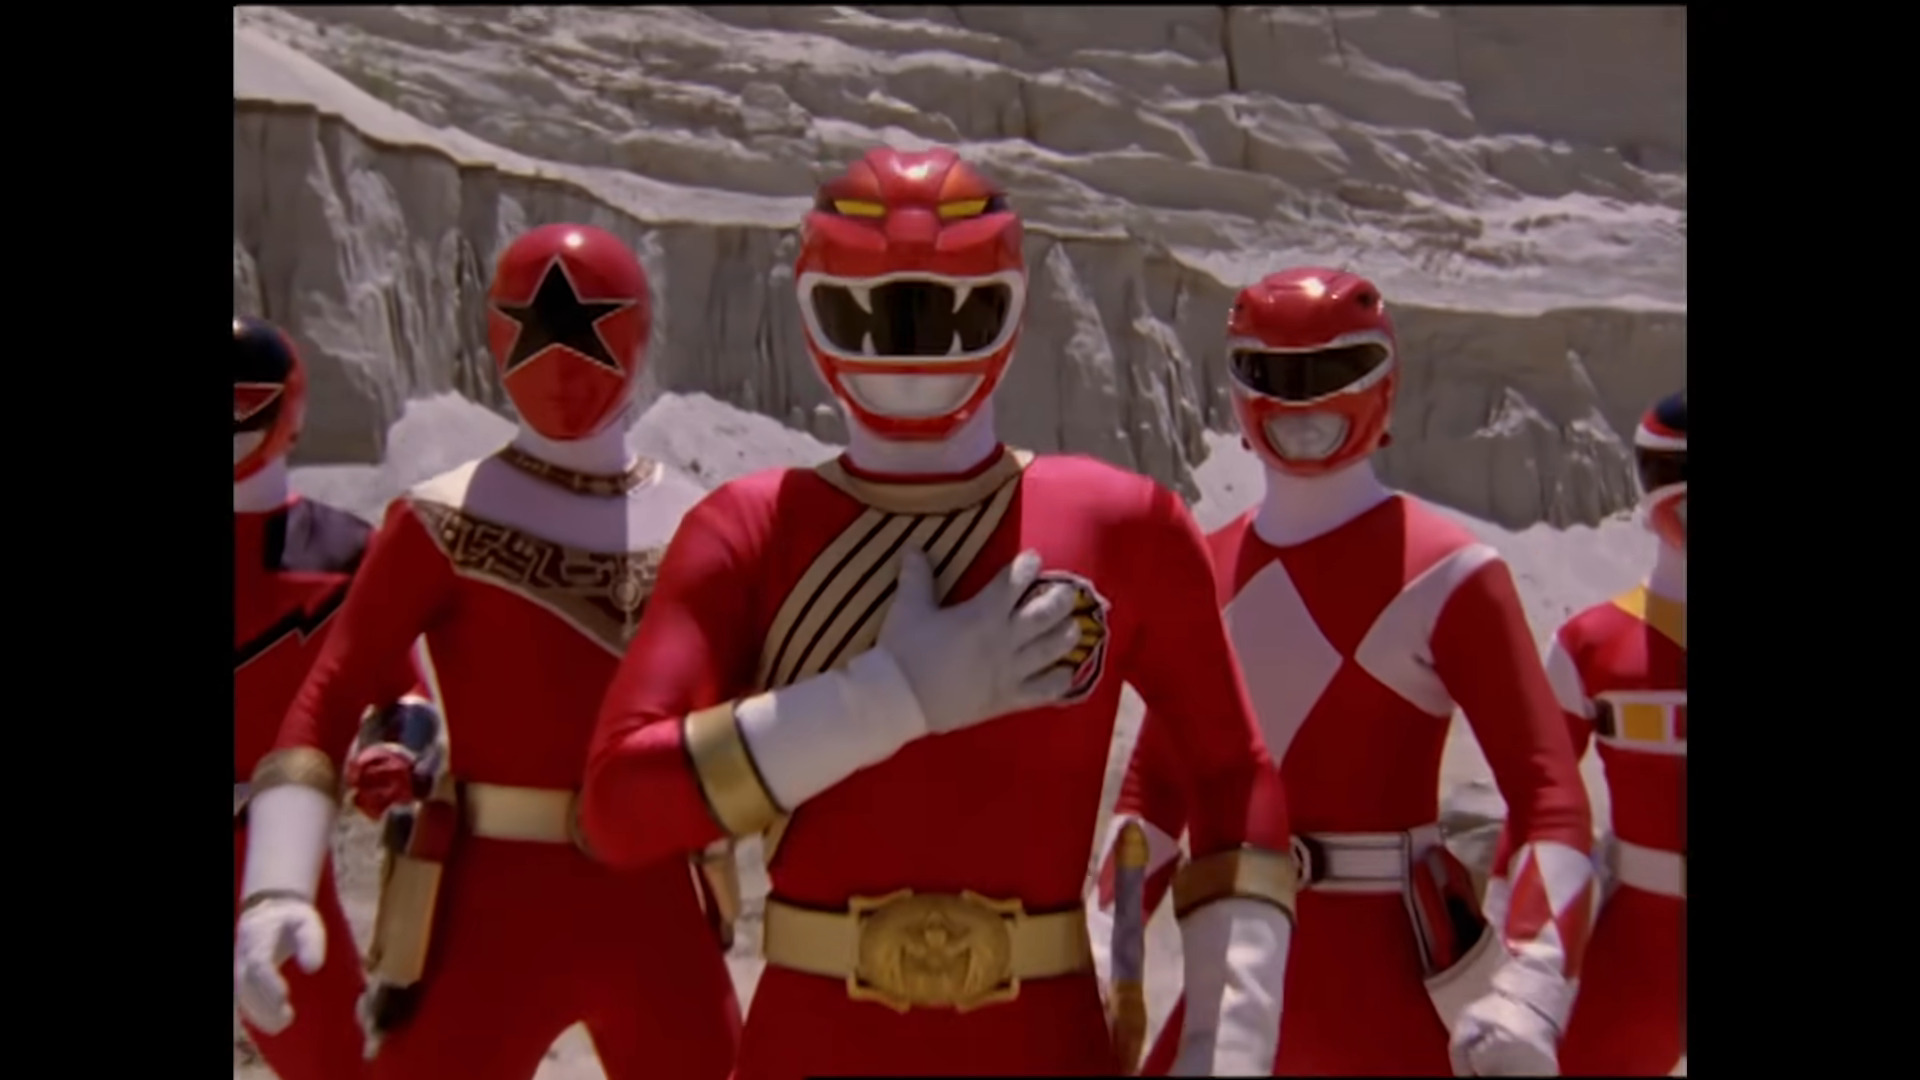 The Red Lion Wild Force (Ricardo Medina Jr.) stands with his allies in Power Rangers Wild Force Episode 34 "Forever Red" (2002), Hasbro (Footage originally from Gaoranger vs. Super Sentai, Forever Red (2001), Toei Co. Ltd.)